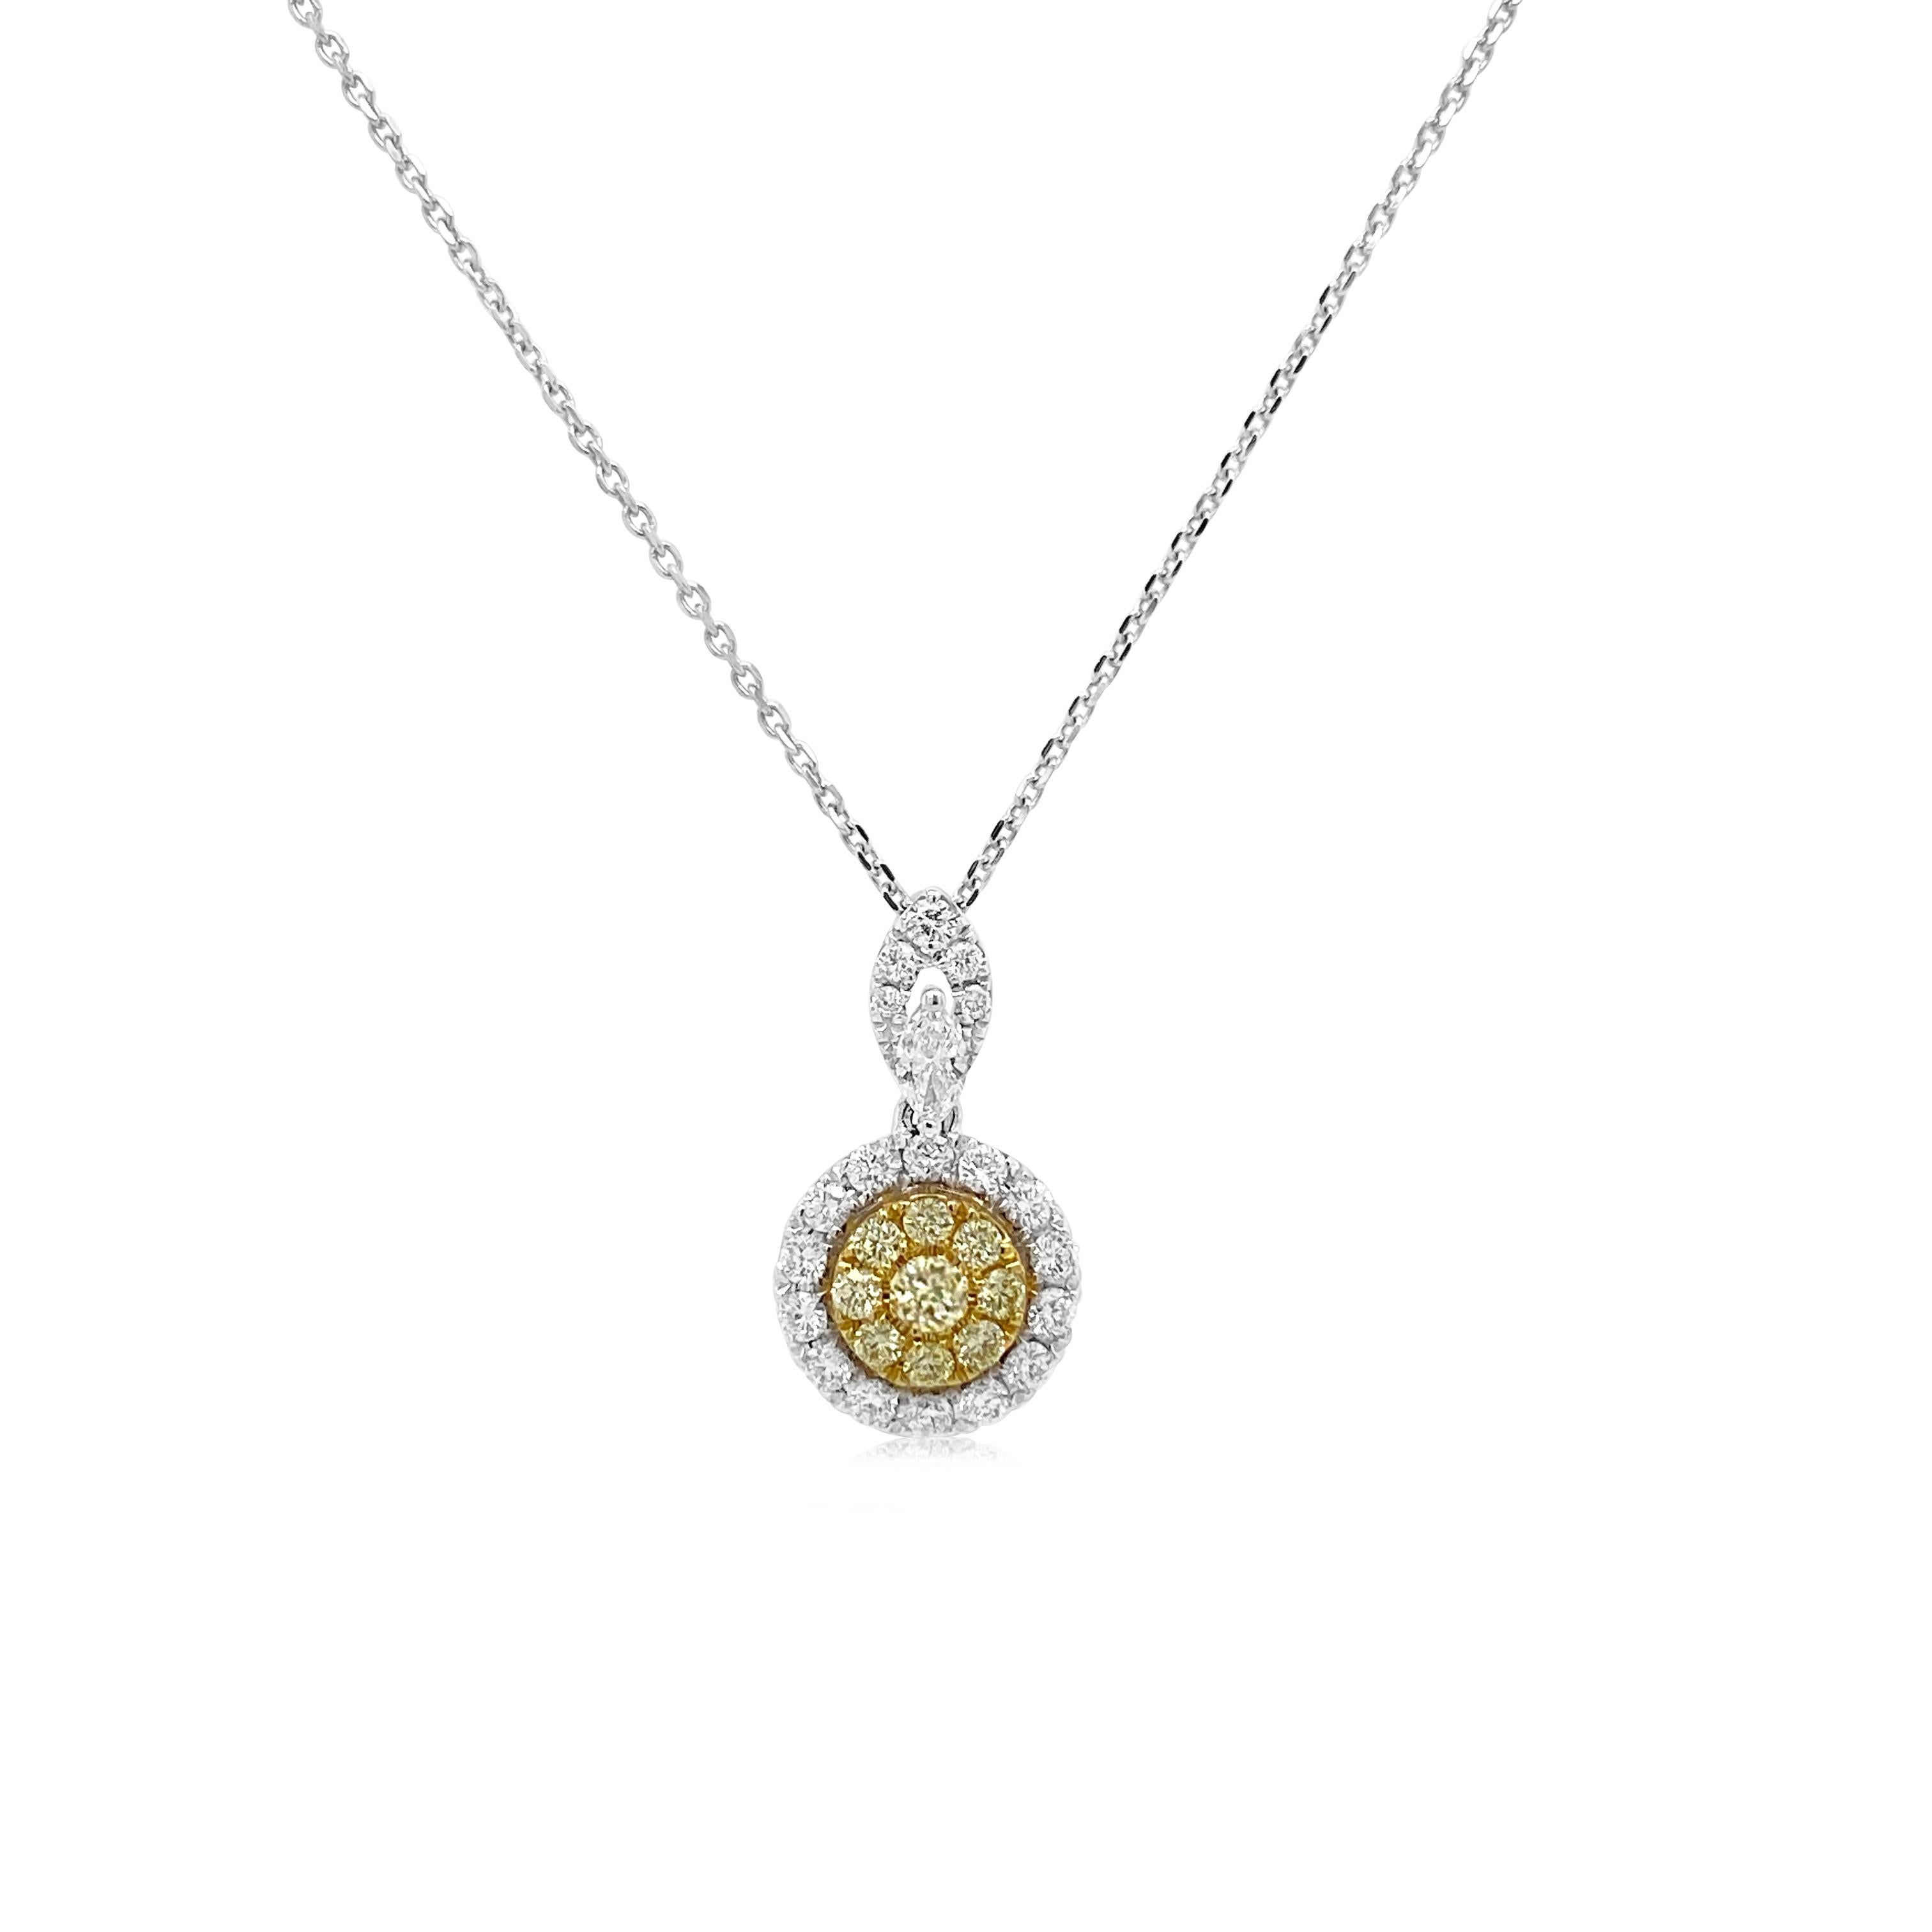 This beautiful pendant has a dainty look with delicately placed Yellow and White diamonds, handcrafted in a charming design.

-	Round Brilliant Cut Yellow Diamonds total 0.153 carat
-	Round Brilliant Cut White Diamonds total 0.21 carat
-	Marquise